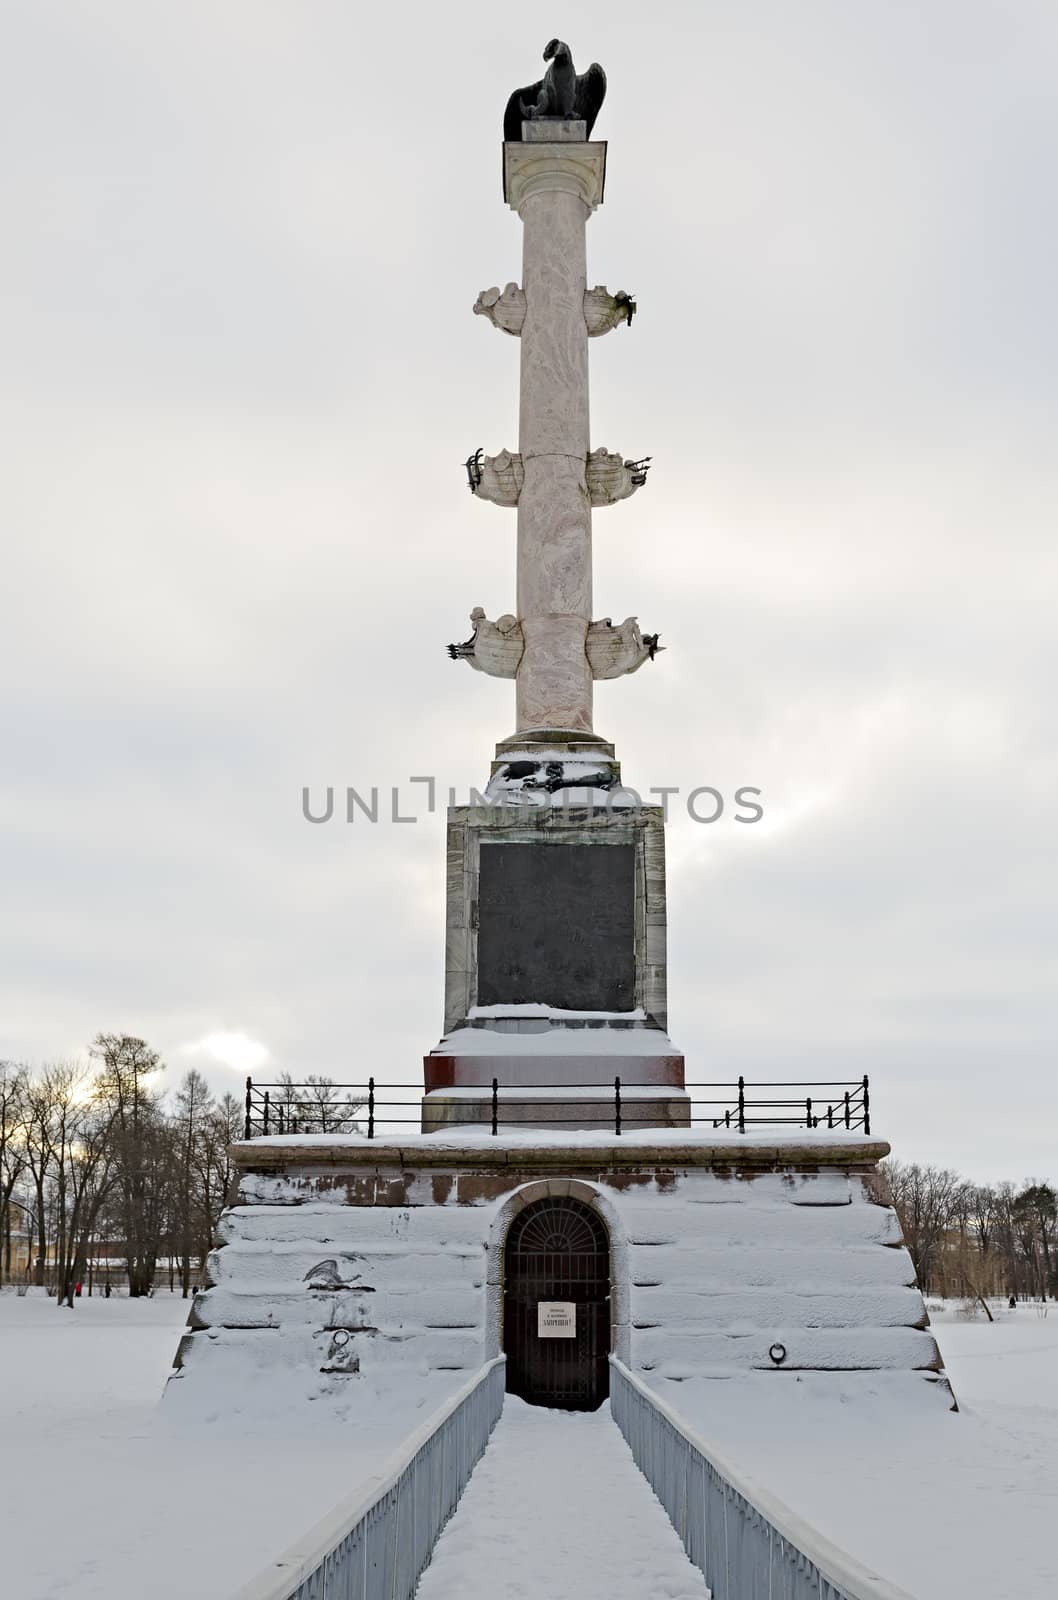 Chesme Column in Tsarskoye Selo commemorates three Russian naval victories in the Russo-Turkish War, 1768-1774, specifically the Battle of Chesma.